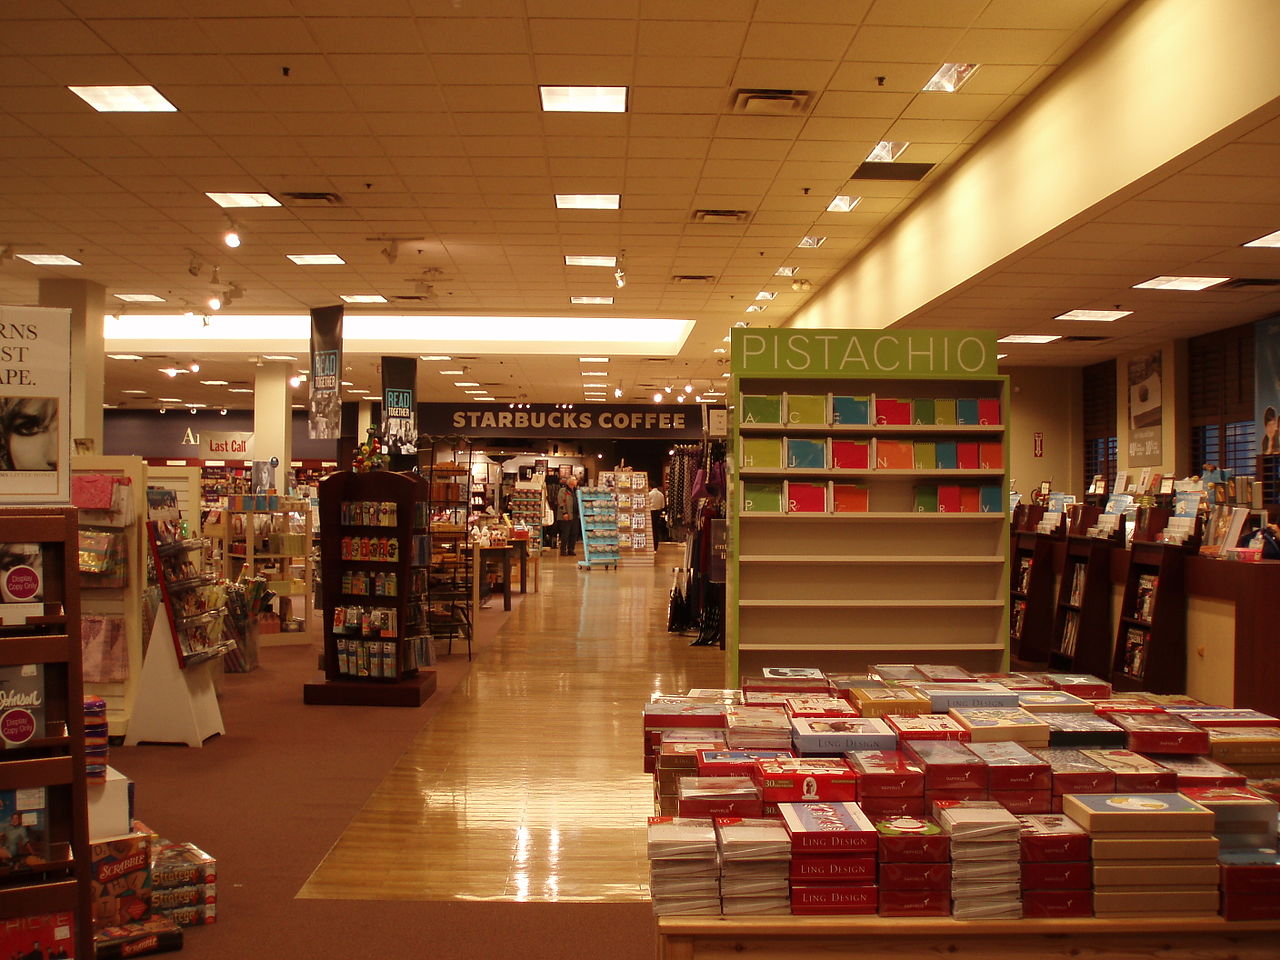 Chapters-Indigo to phase out books to sell more fleece blankets ...